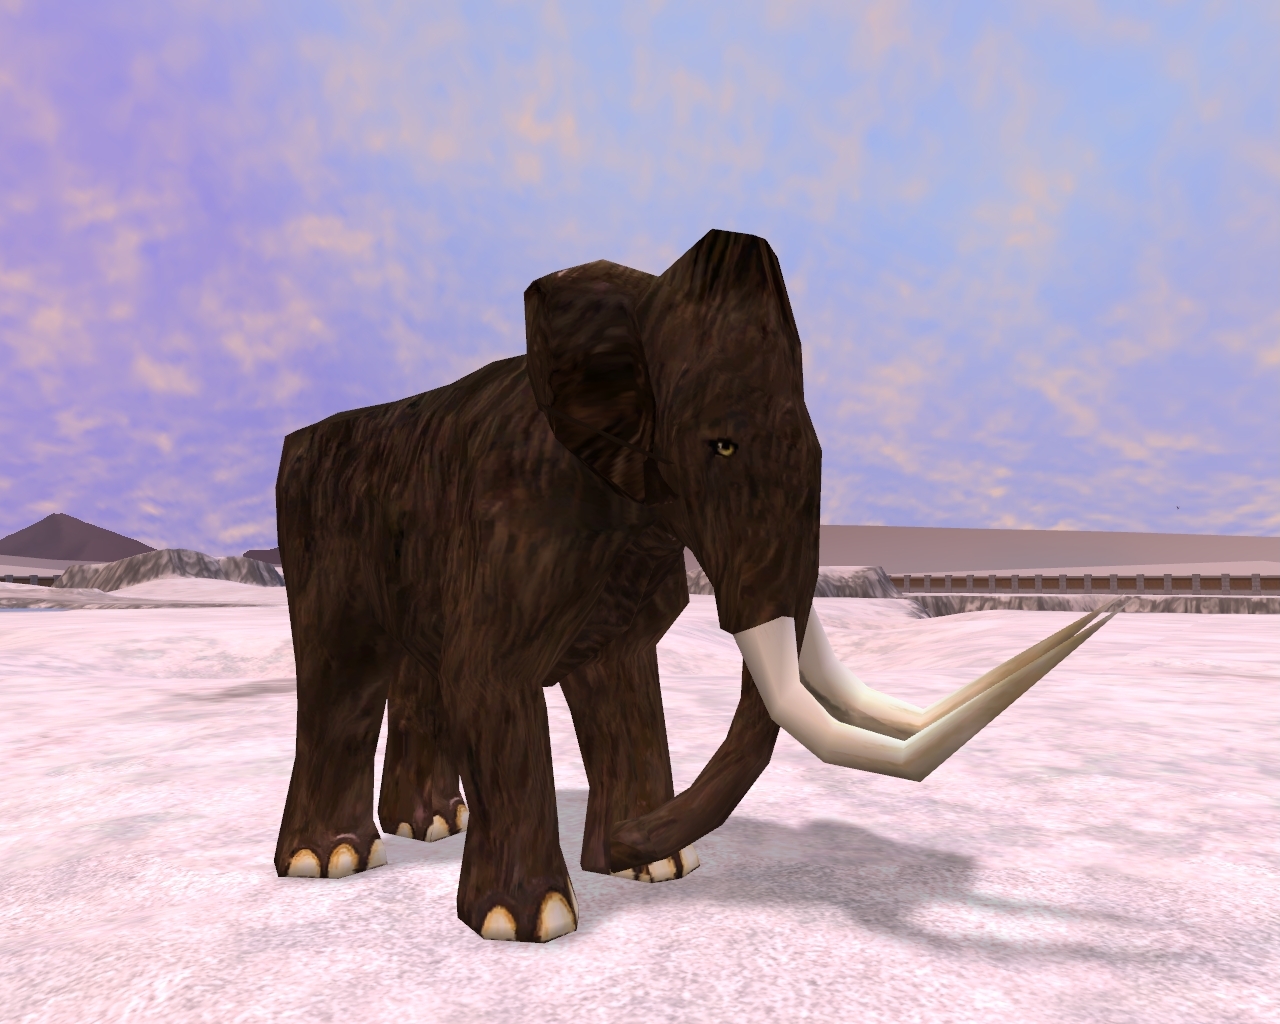 [ZT2] Woolly Mammoth by thezootycooner22 on DeviantArt